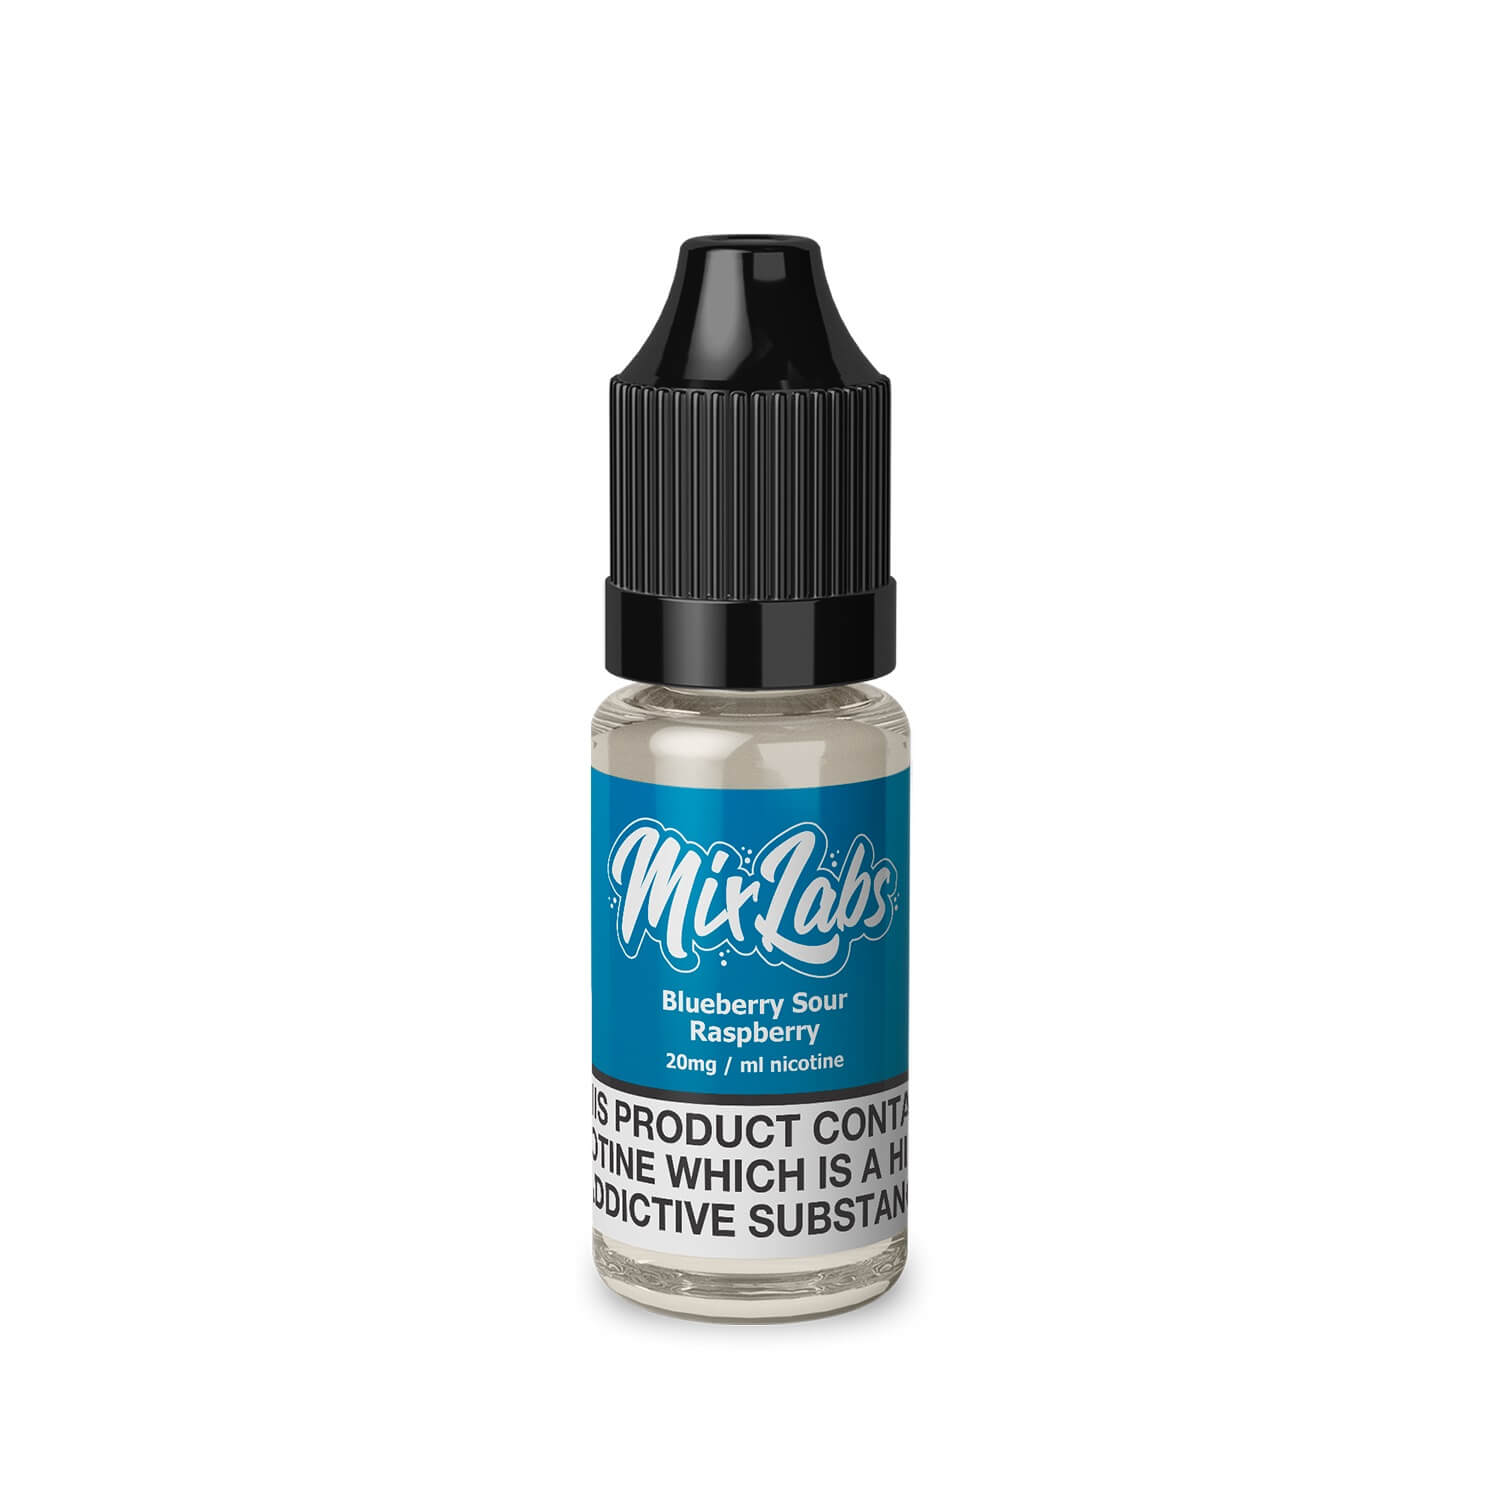 Mix labs 20mg nic salts 10ml blueberry sour raspberry available at dispergo vaping uk